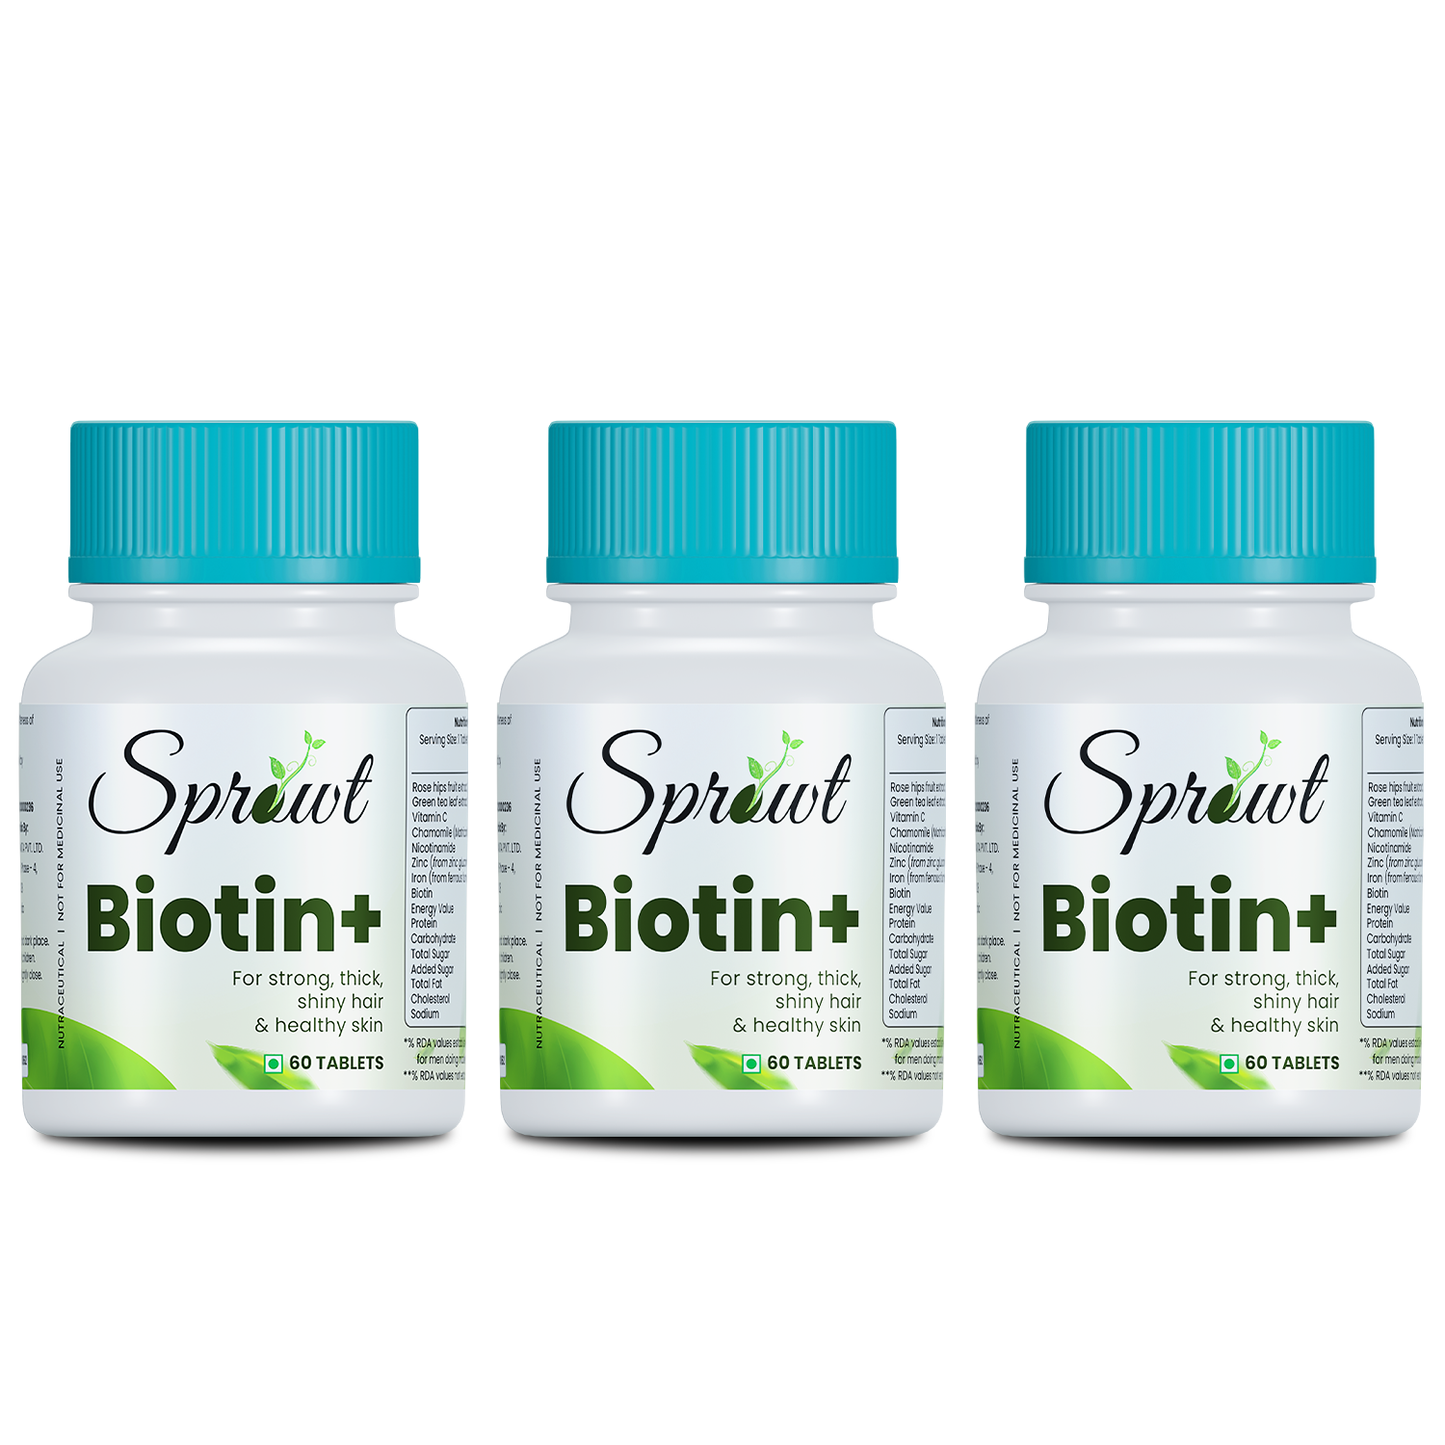 Sprowt Biotin + Tablet | Supplement For Strong Thick Hair & Glowing Skin | Improve the Energy Level | With Vitamin C, Green tea, Rosehip Extracts | Men & Women | 60 Biotin Veg Tablets - Pack of 3